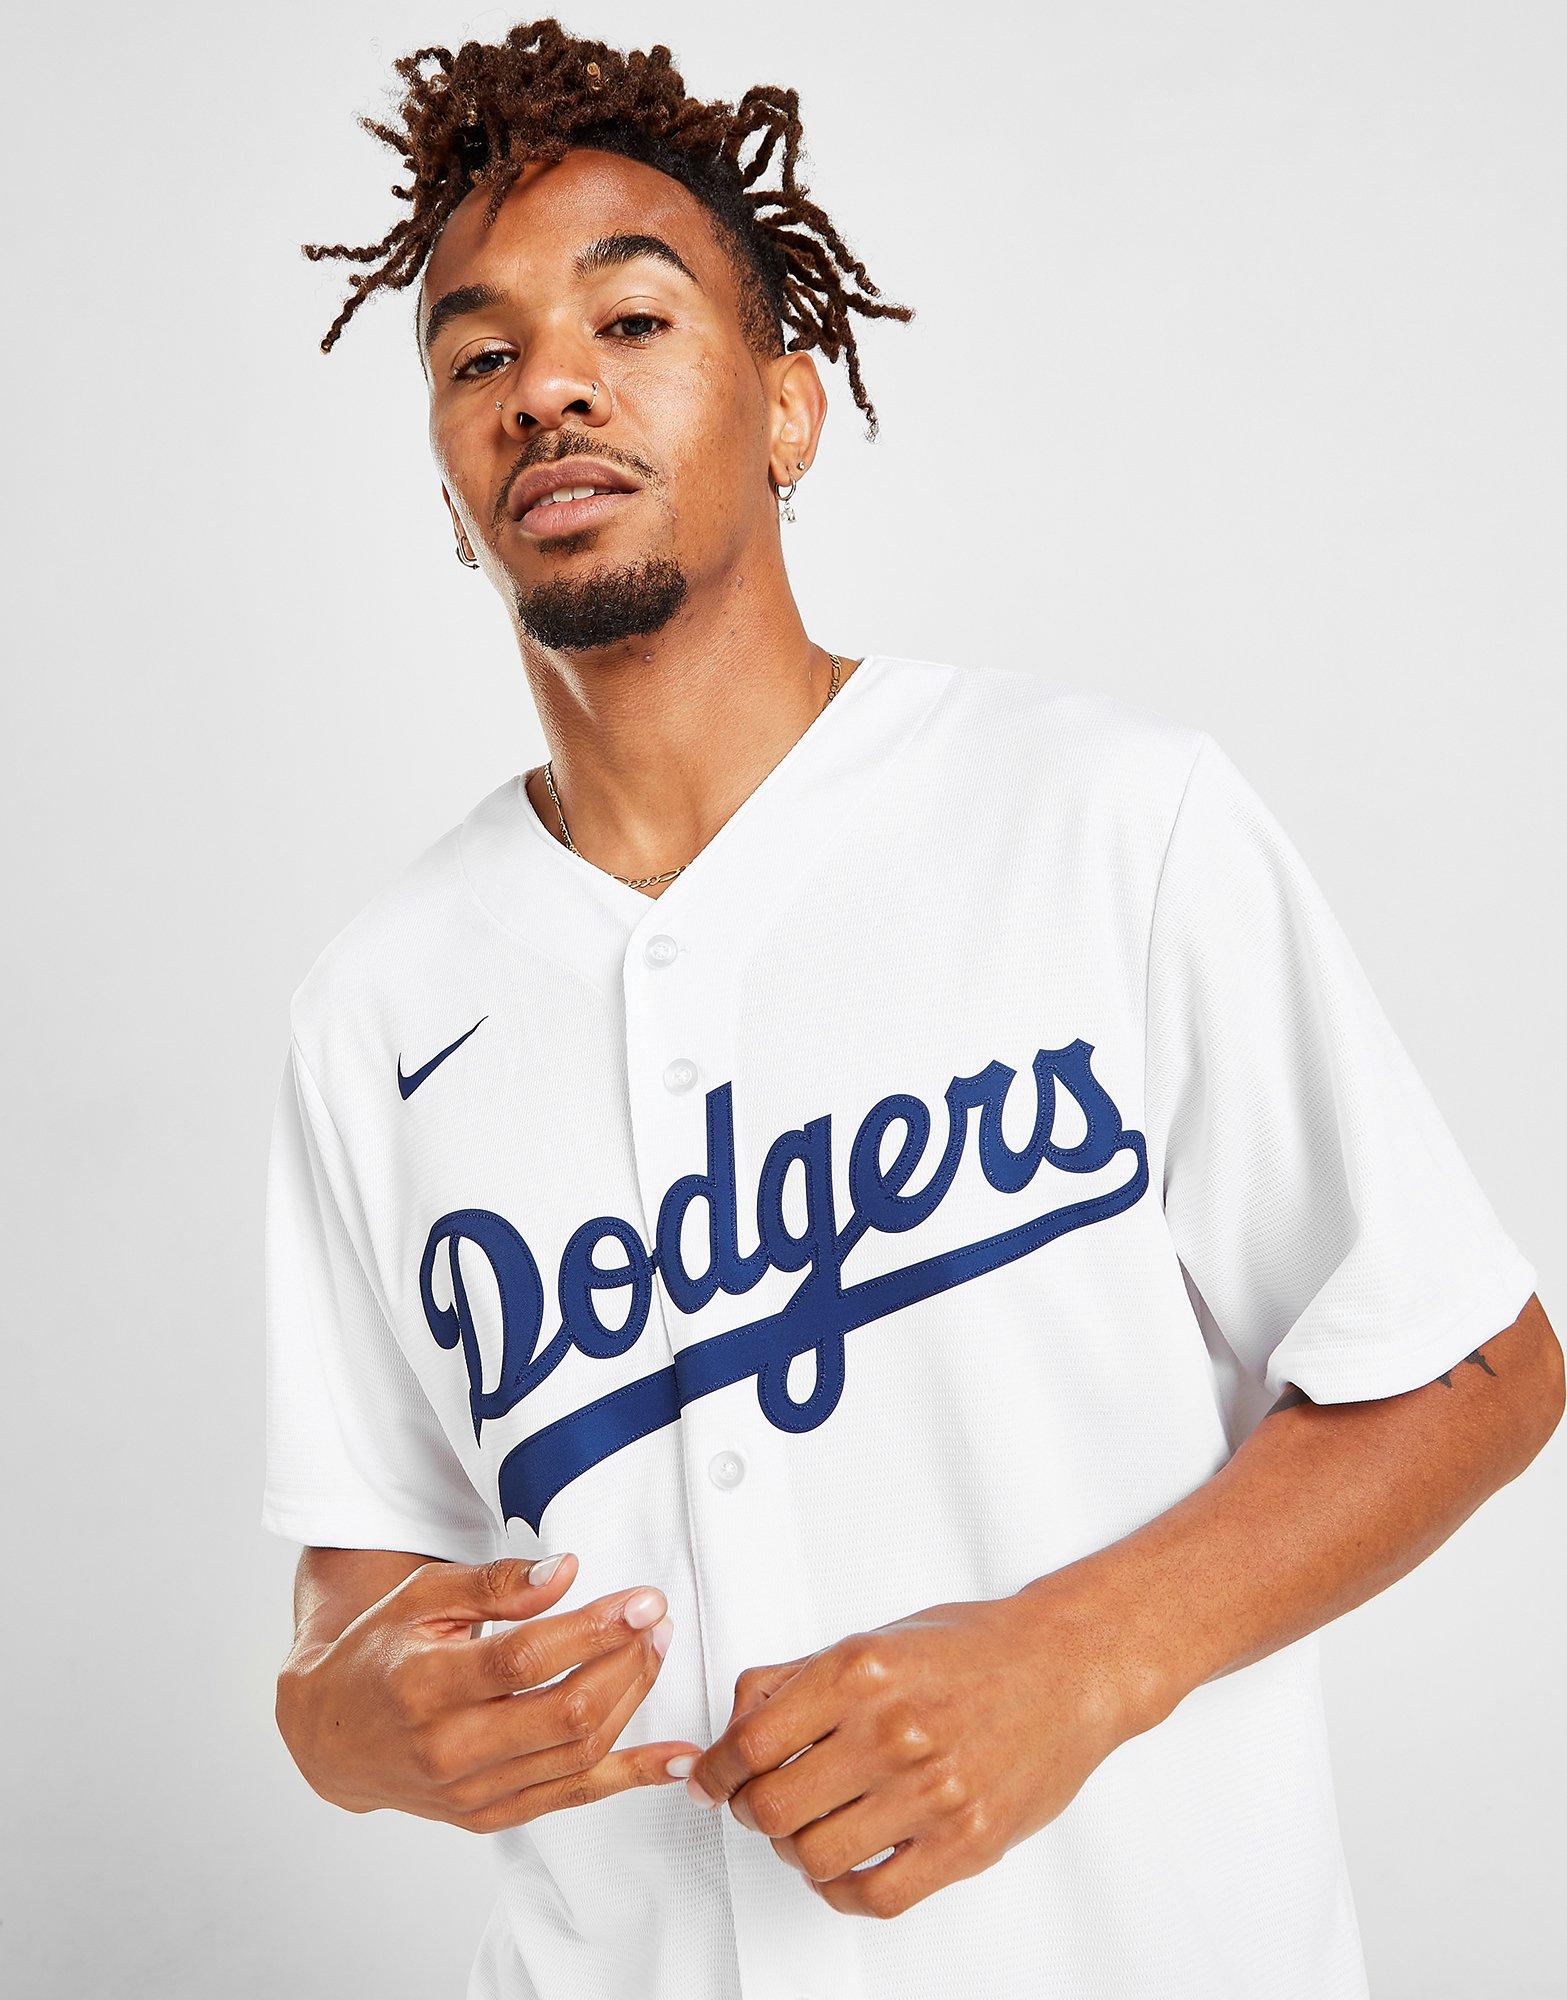 dodgers jersey small